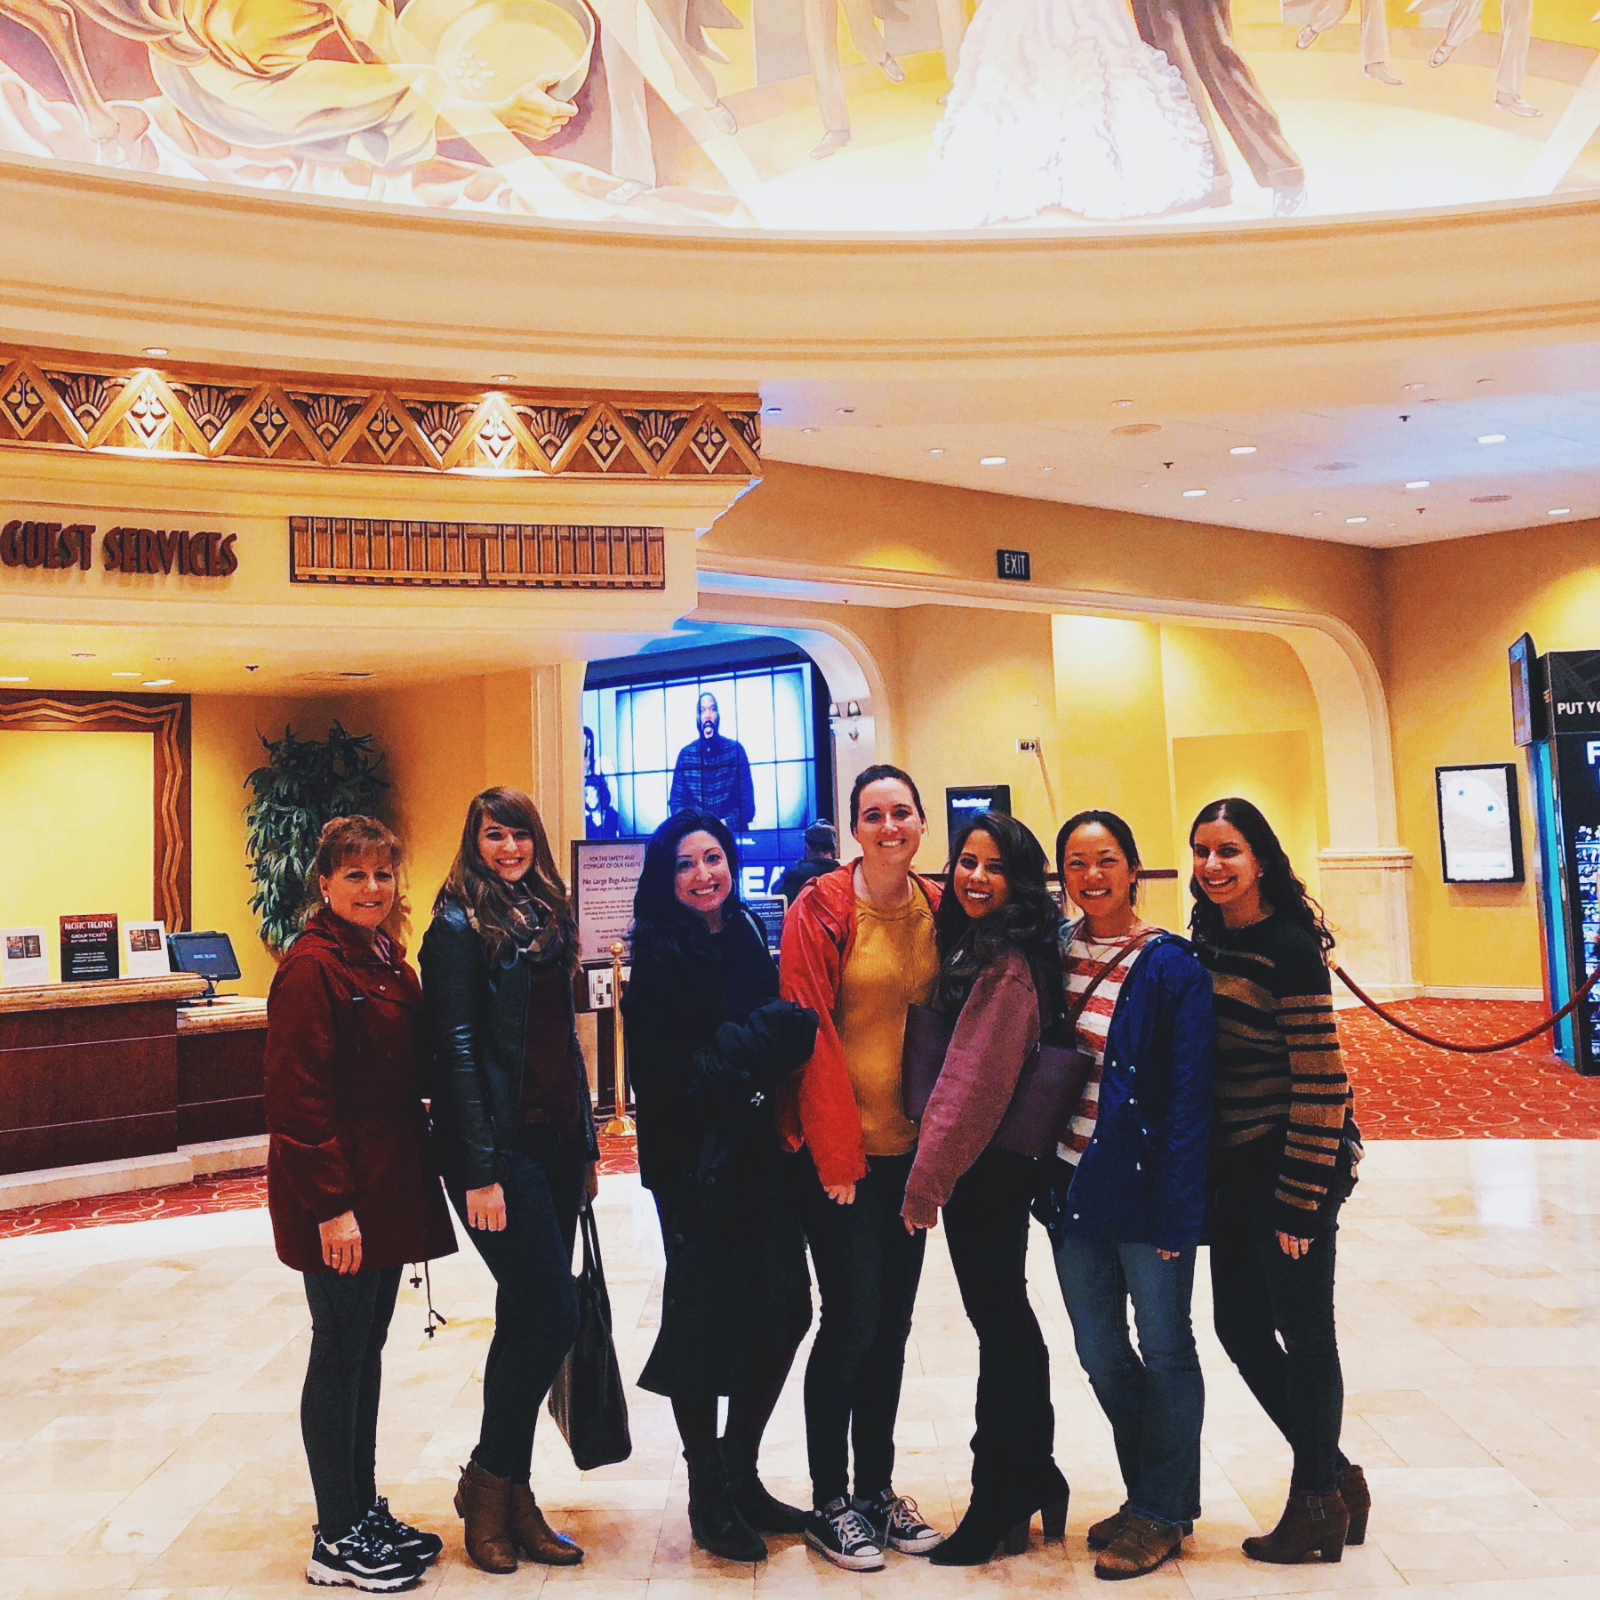 Group of girls in the lobby of a movie theater